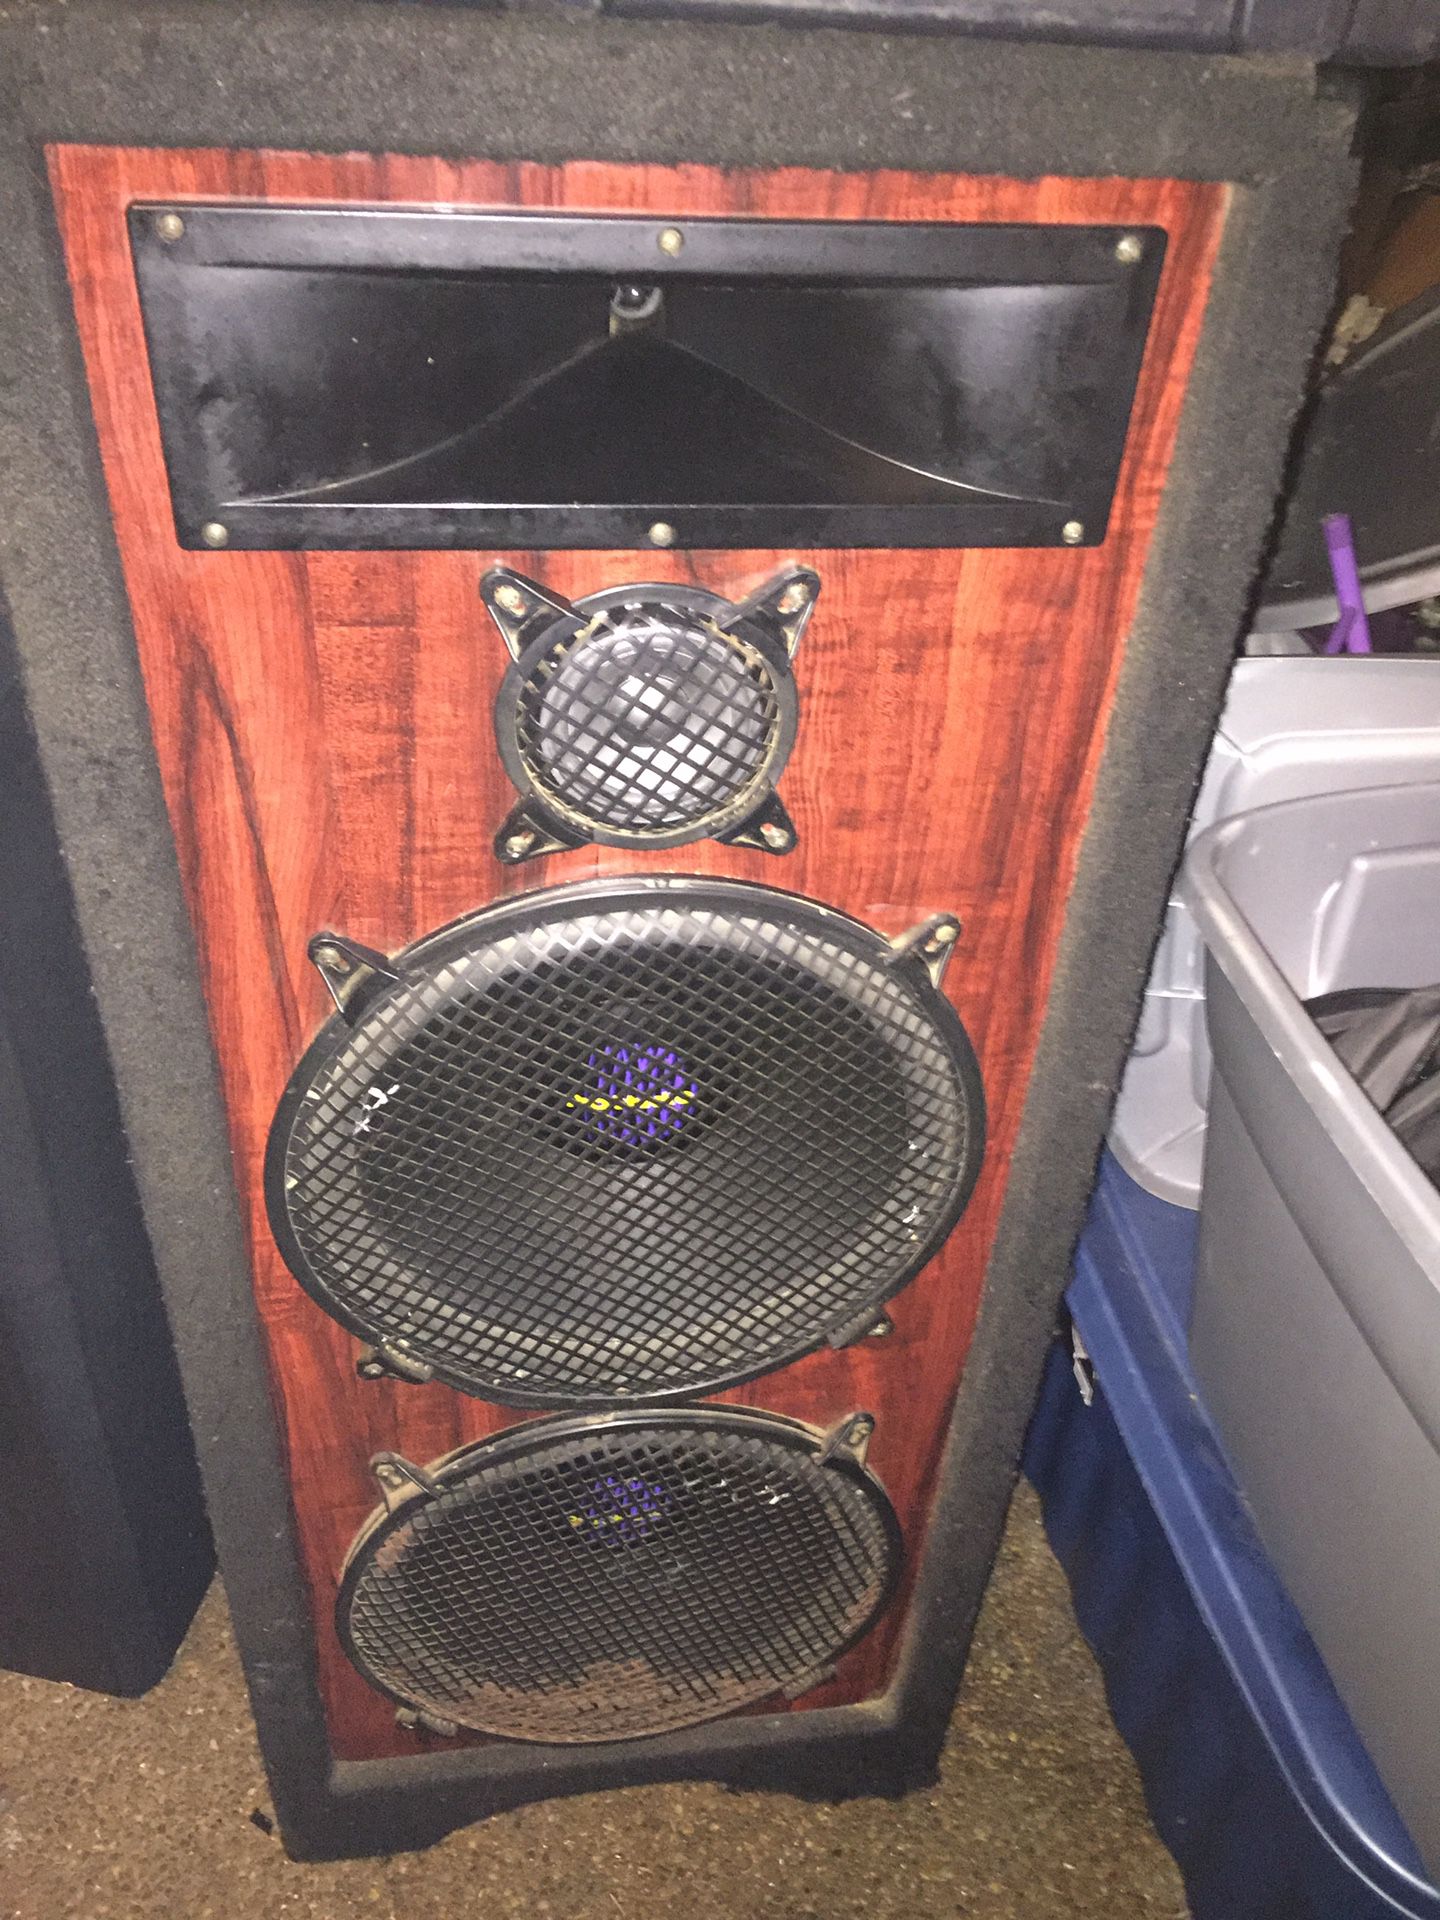 Set of 2 pro studio each speaker has 2 15” subwoofers great condition VERY LOUD so a total of 4 15”” subwoofers with both speakers